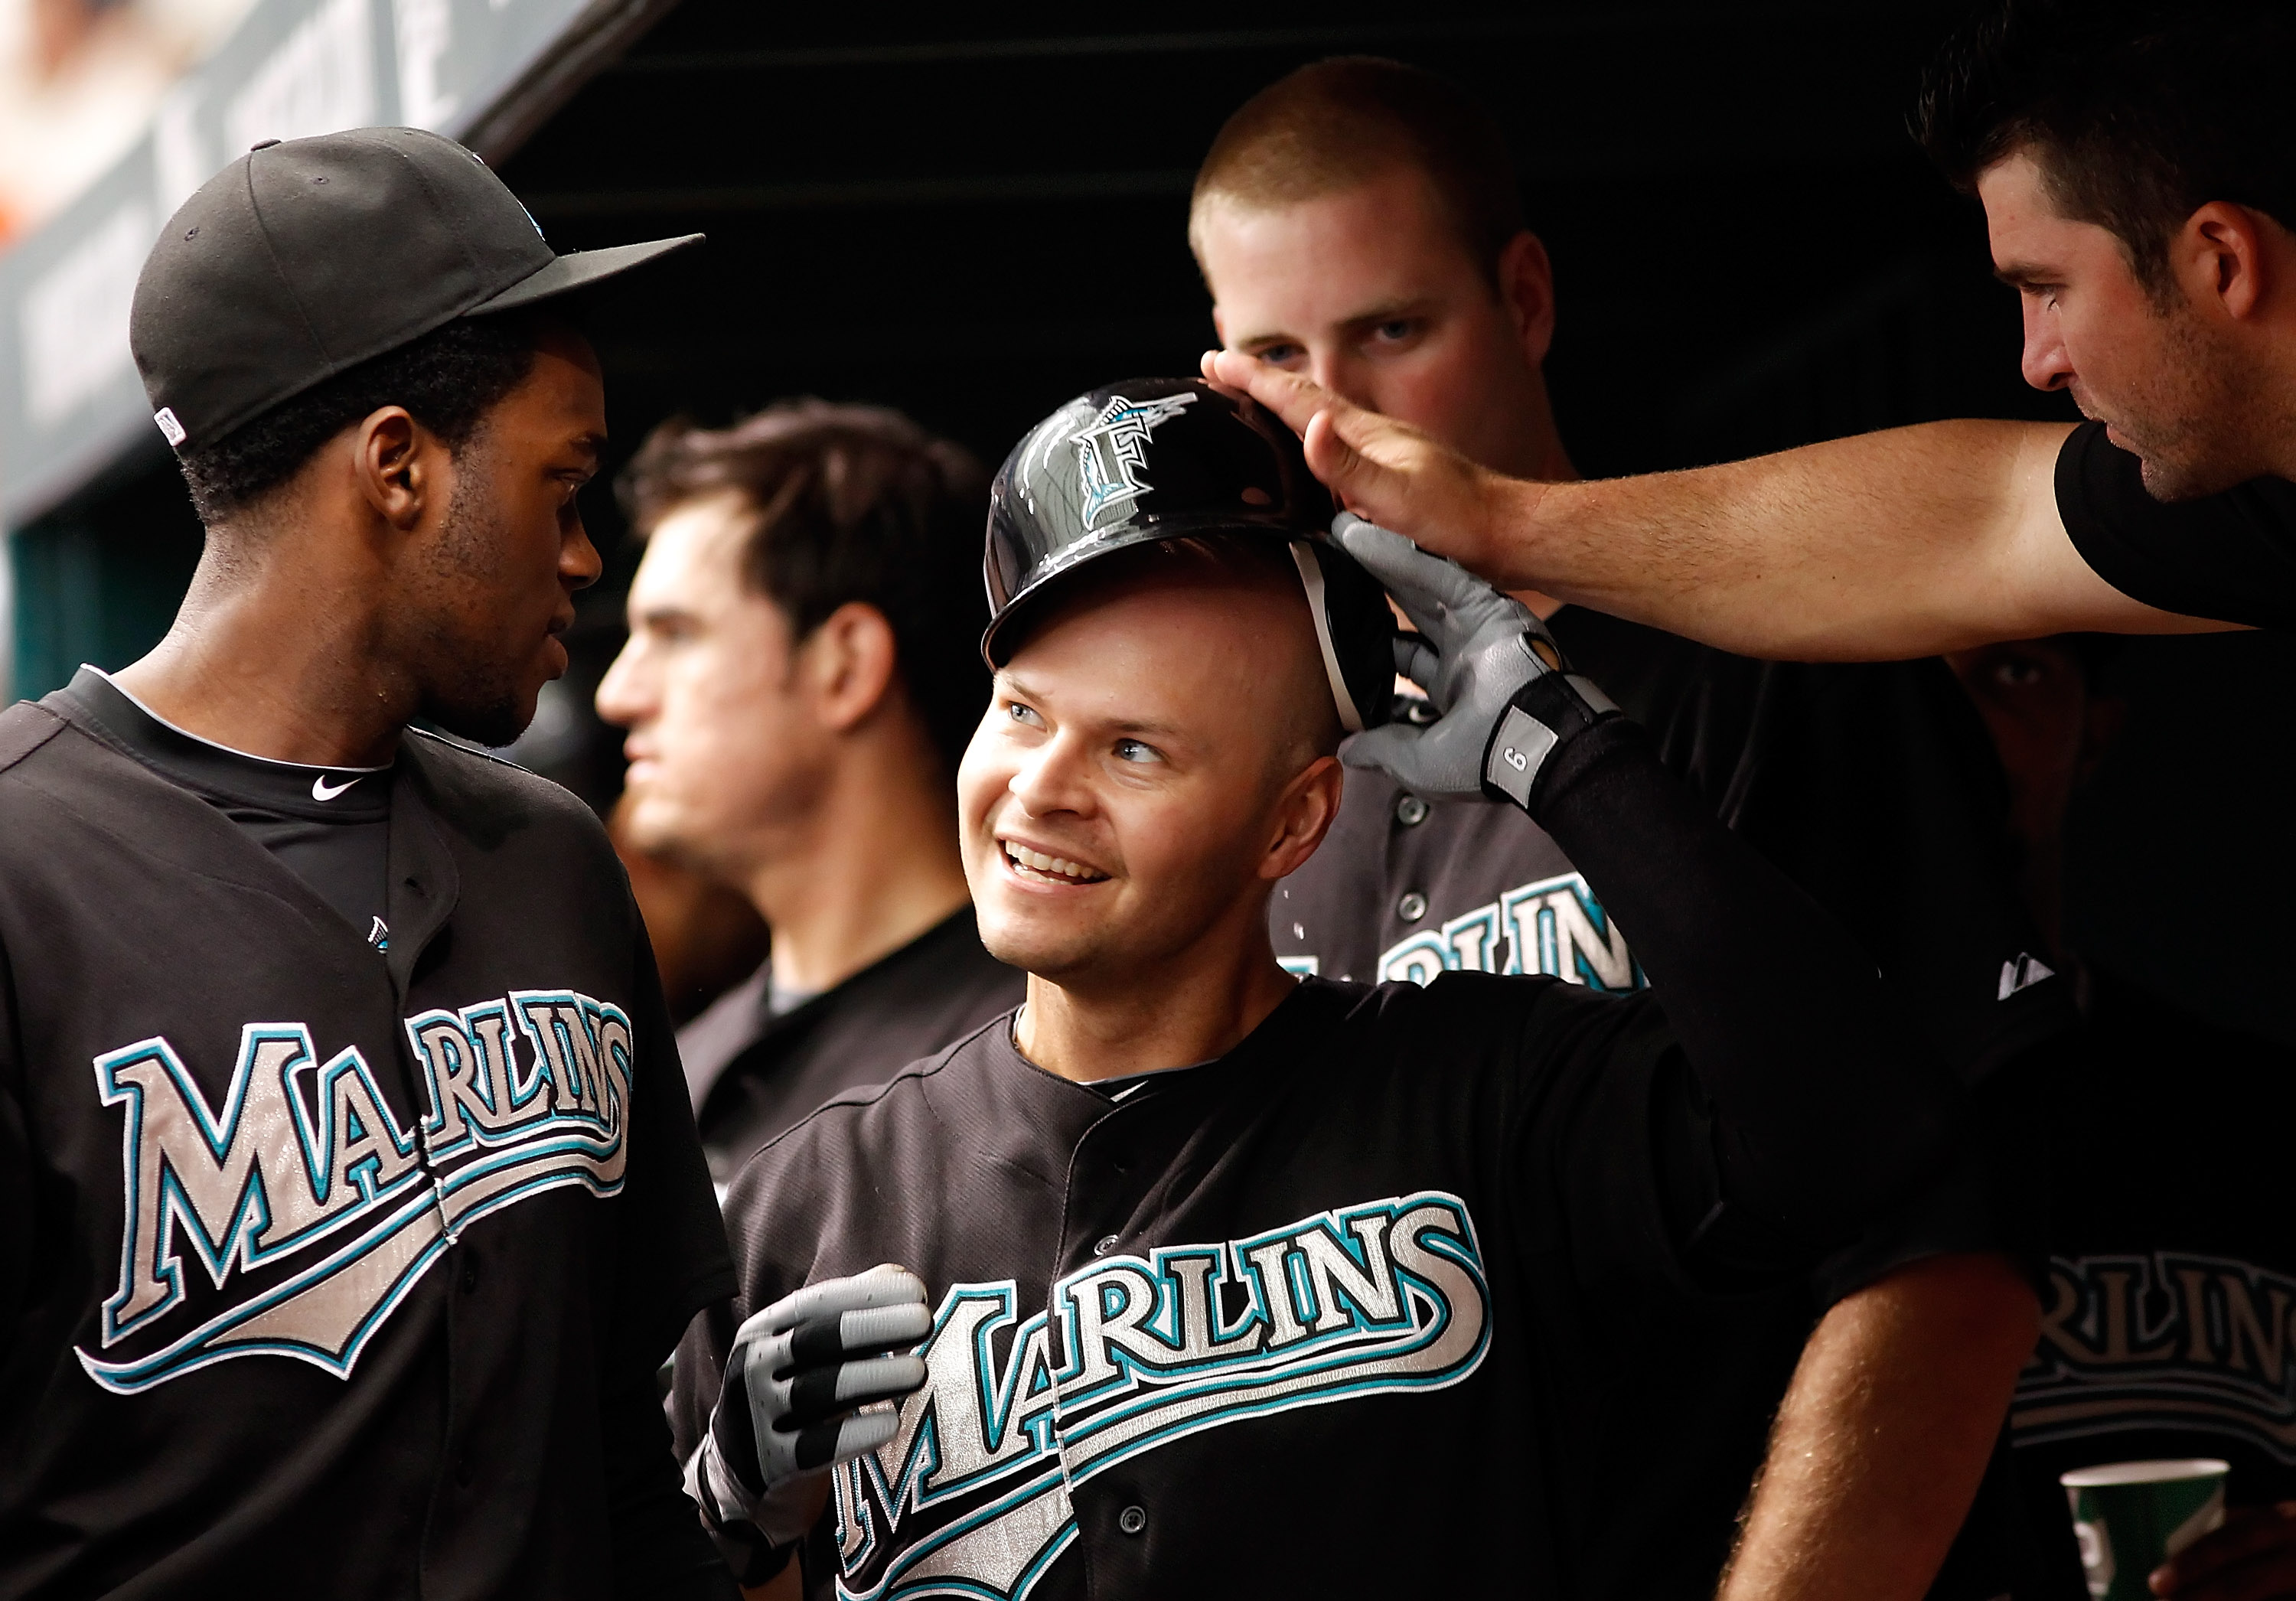 ST. PETERSBURG, FL - JUNE 13:  Outfielder Cody Ross #12 of the Florida Marlins is congratulated after scoring a run against the Tampa Bay Rays during the game at Tropicana Field on June 13, 2010 in St. Petersburg, Florida.  (Photo by J. Meric/Getty Images